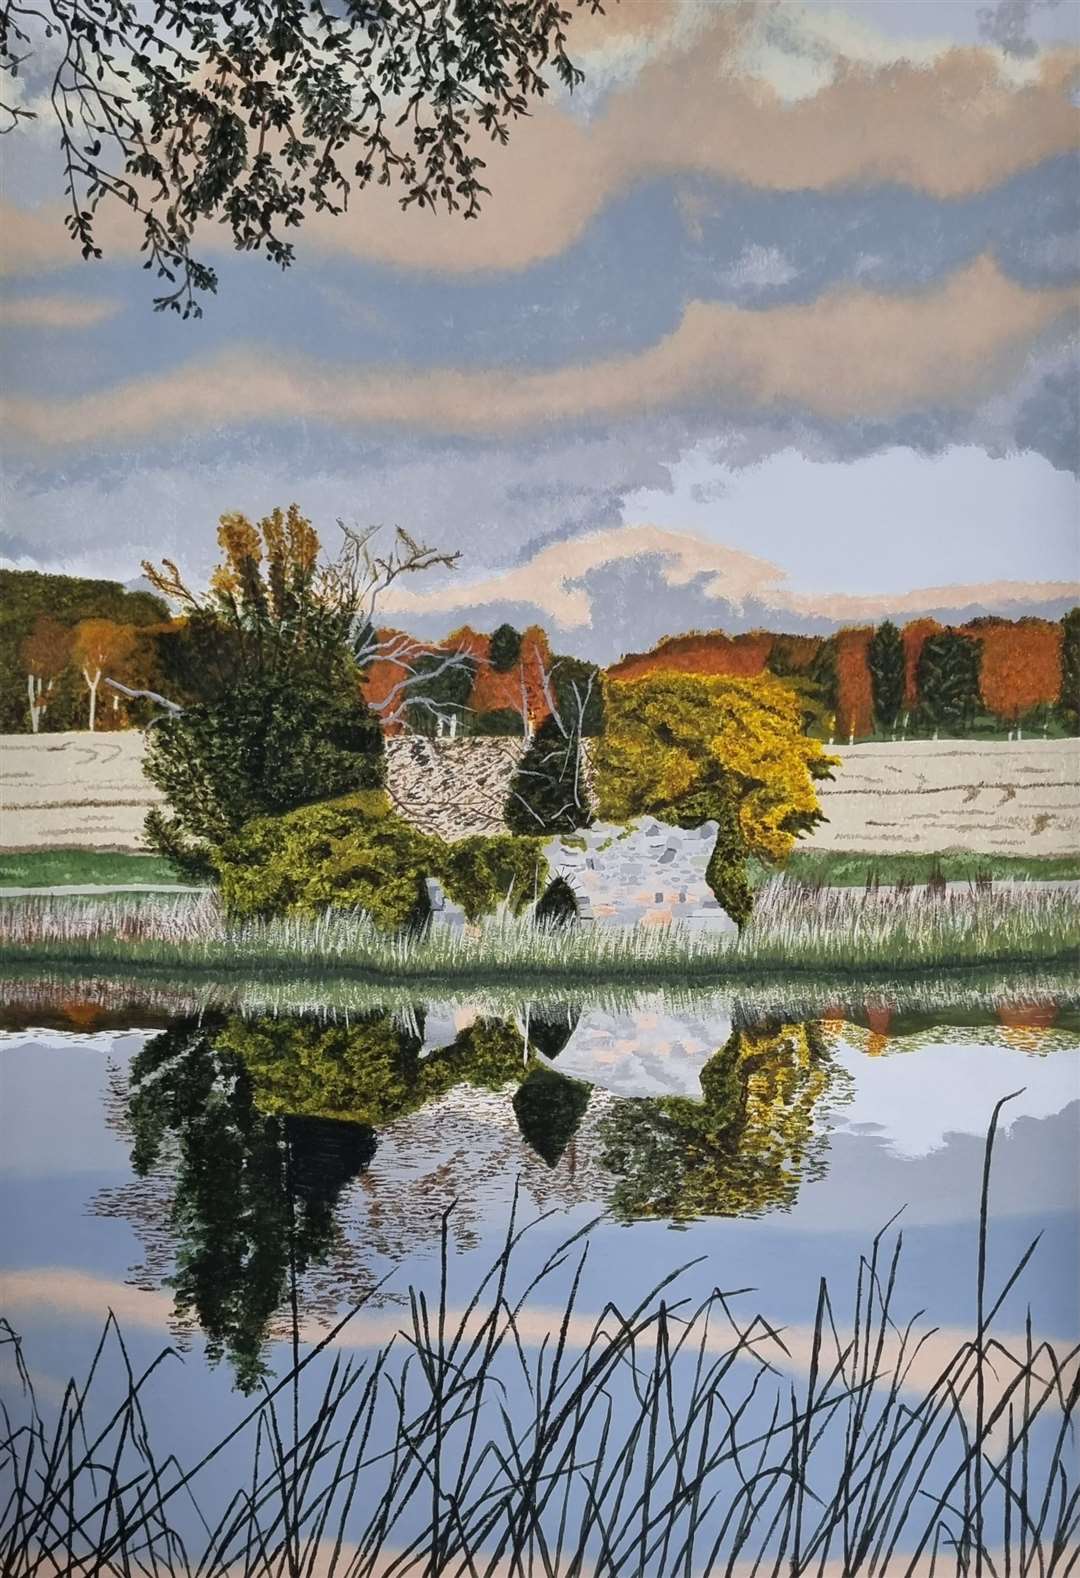 Reflections at Pitfour lake is the work of Amy Etta Seivwright.